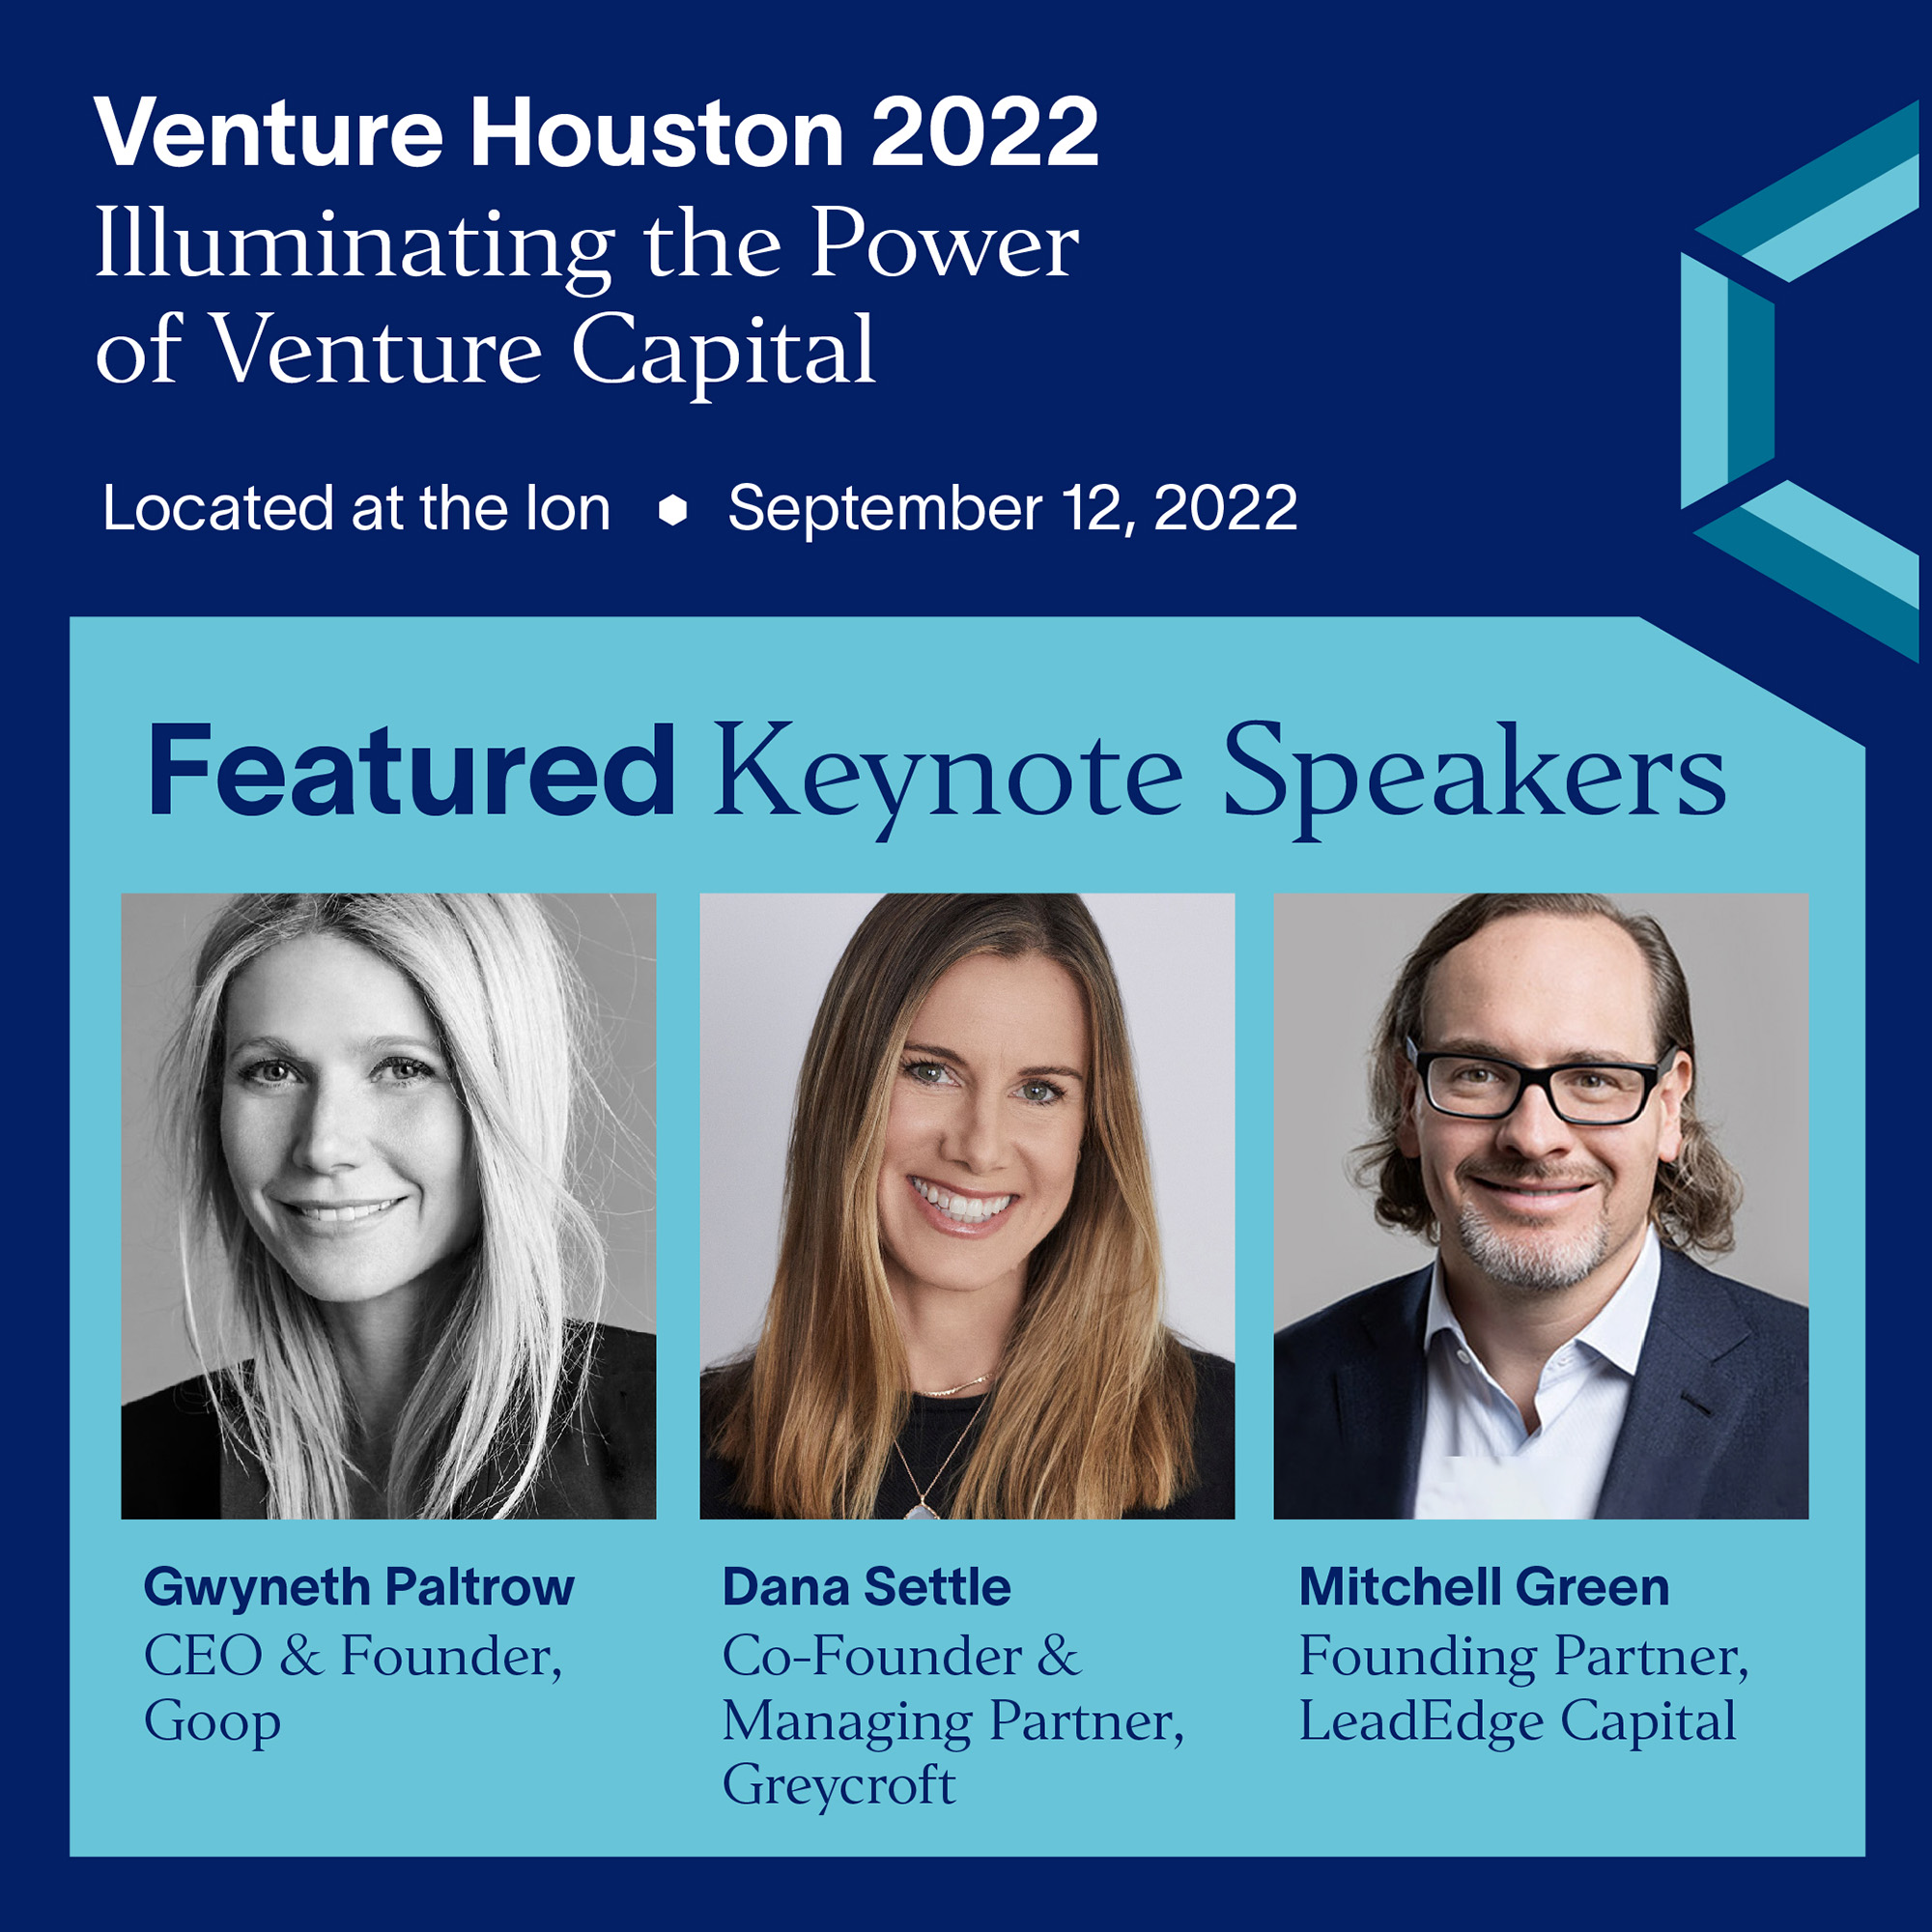 Featured Keynote Speakers at Venture Houston 2022 include Gwyneth Paltrow, Dana Settle and Mitchell Green.